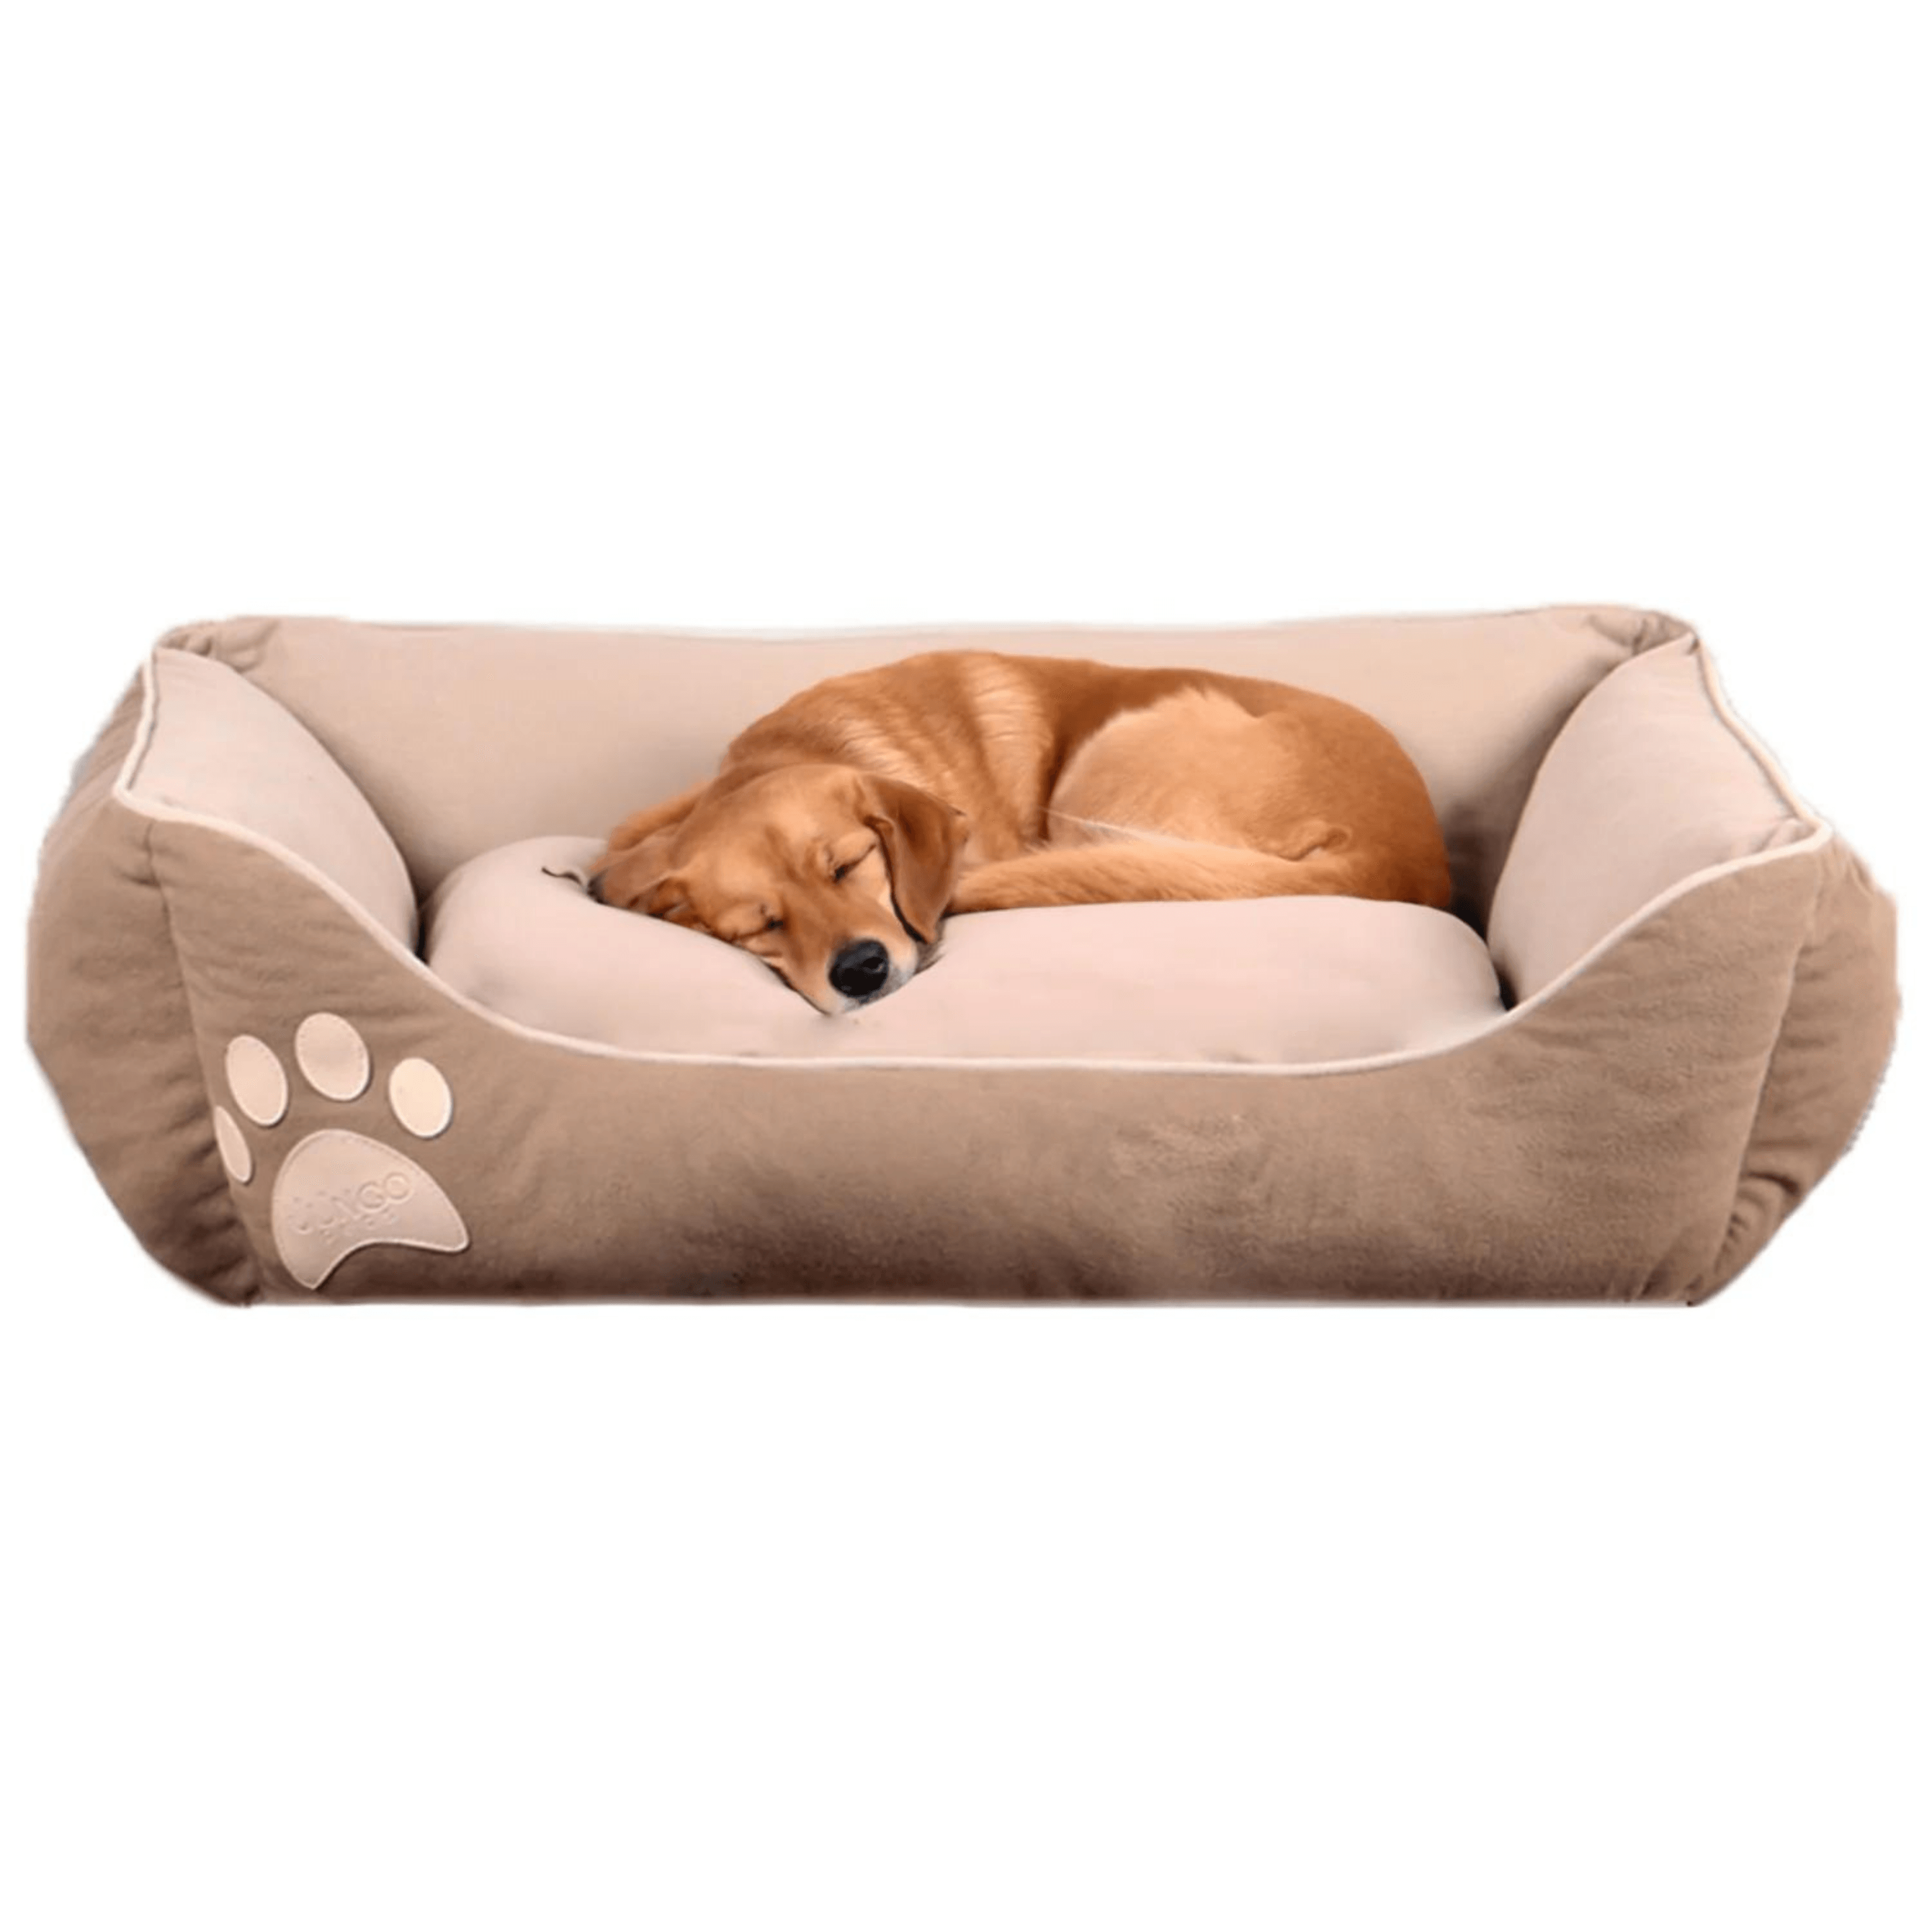 LUCY Brown & Beige High Quality Dog Bed